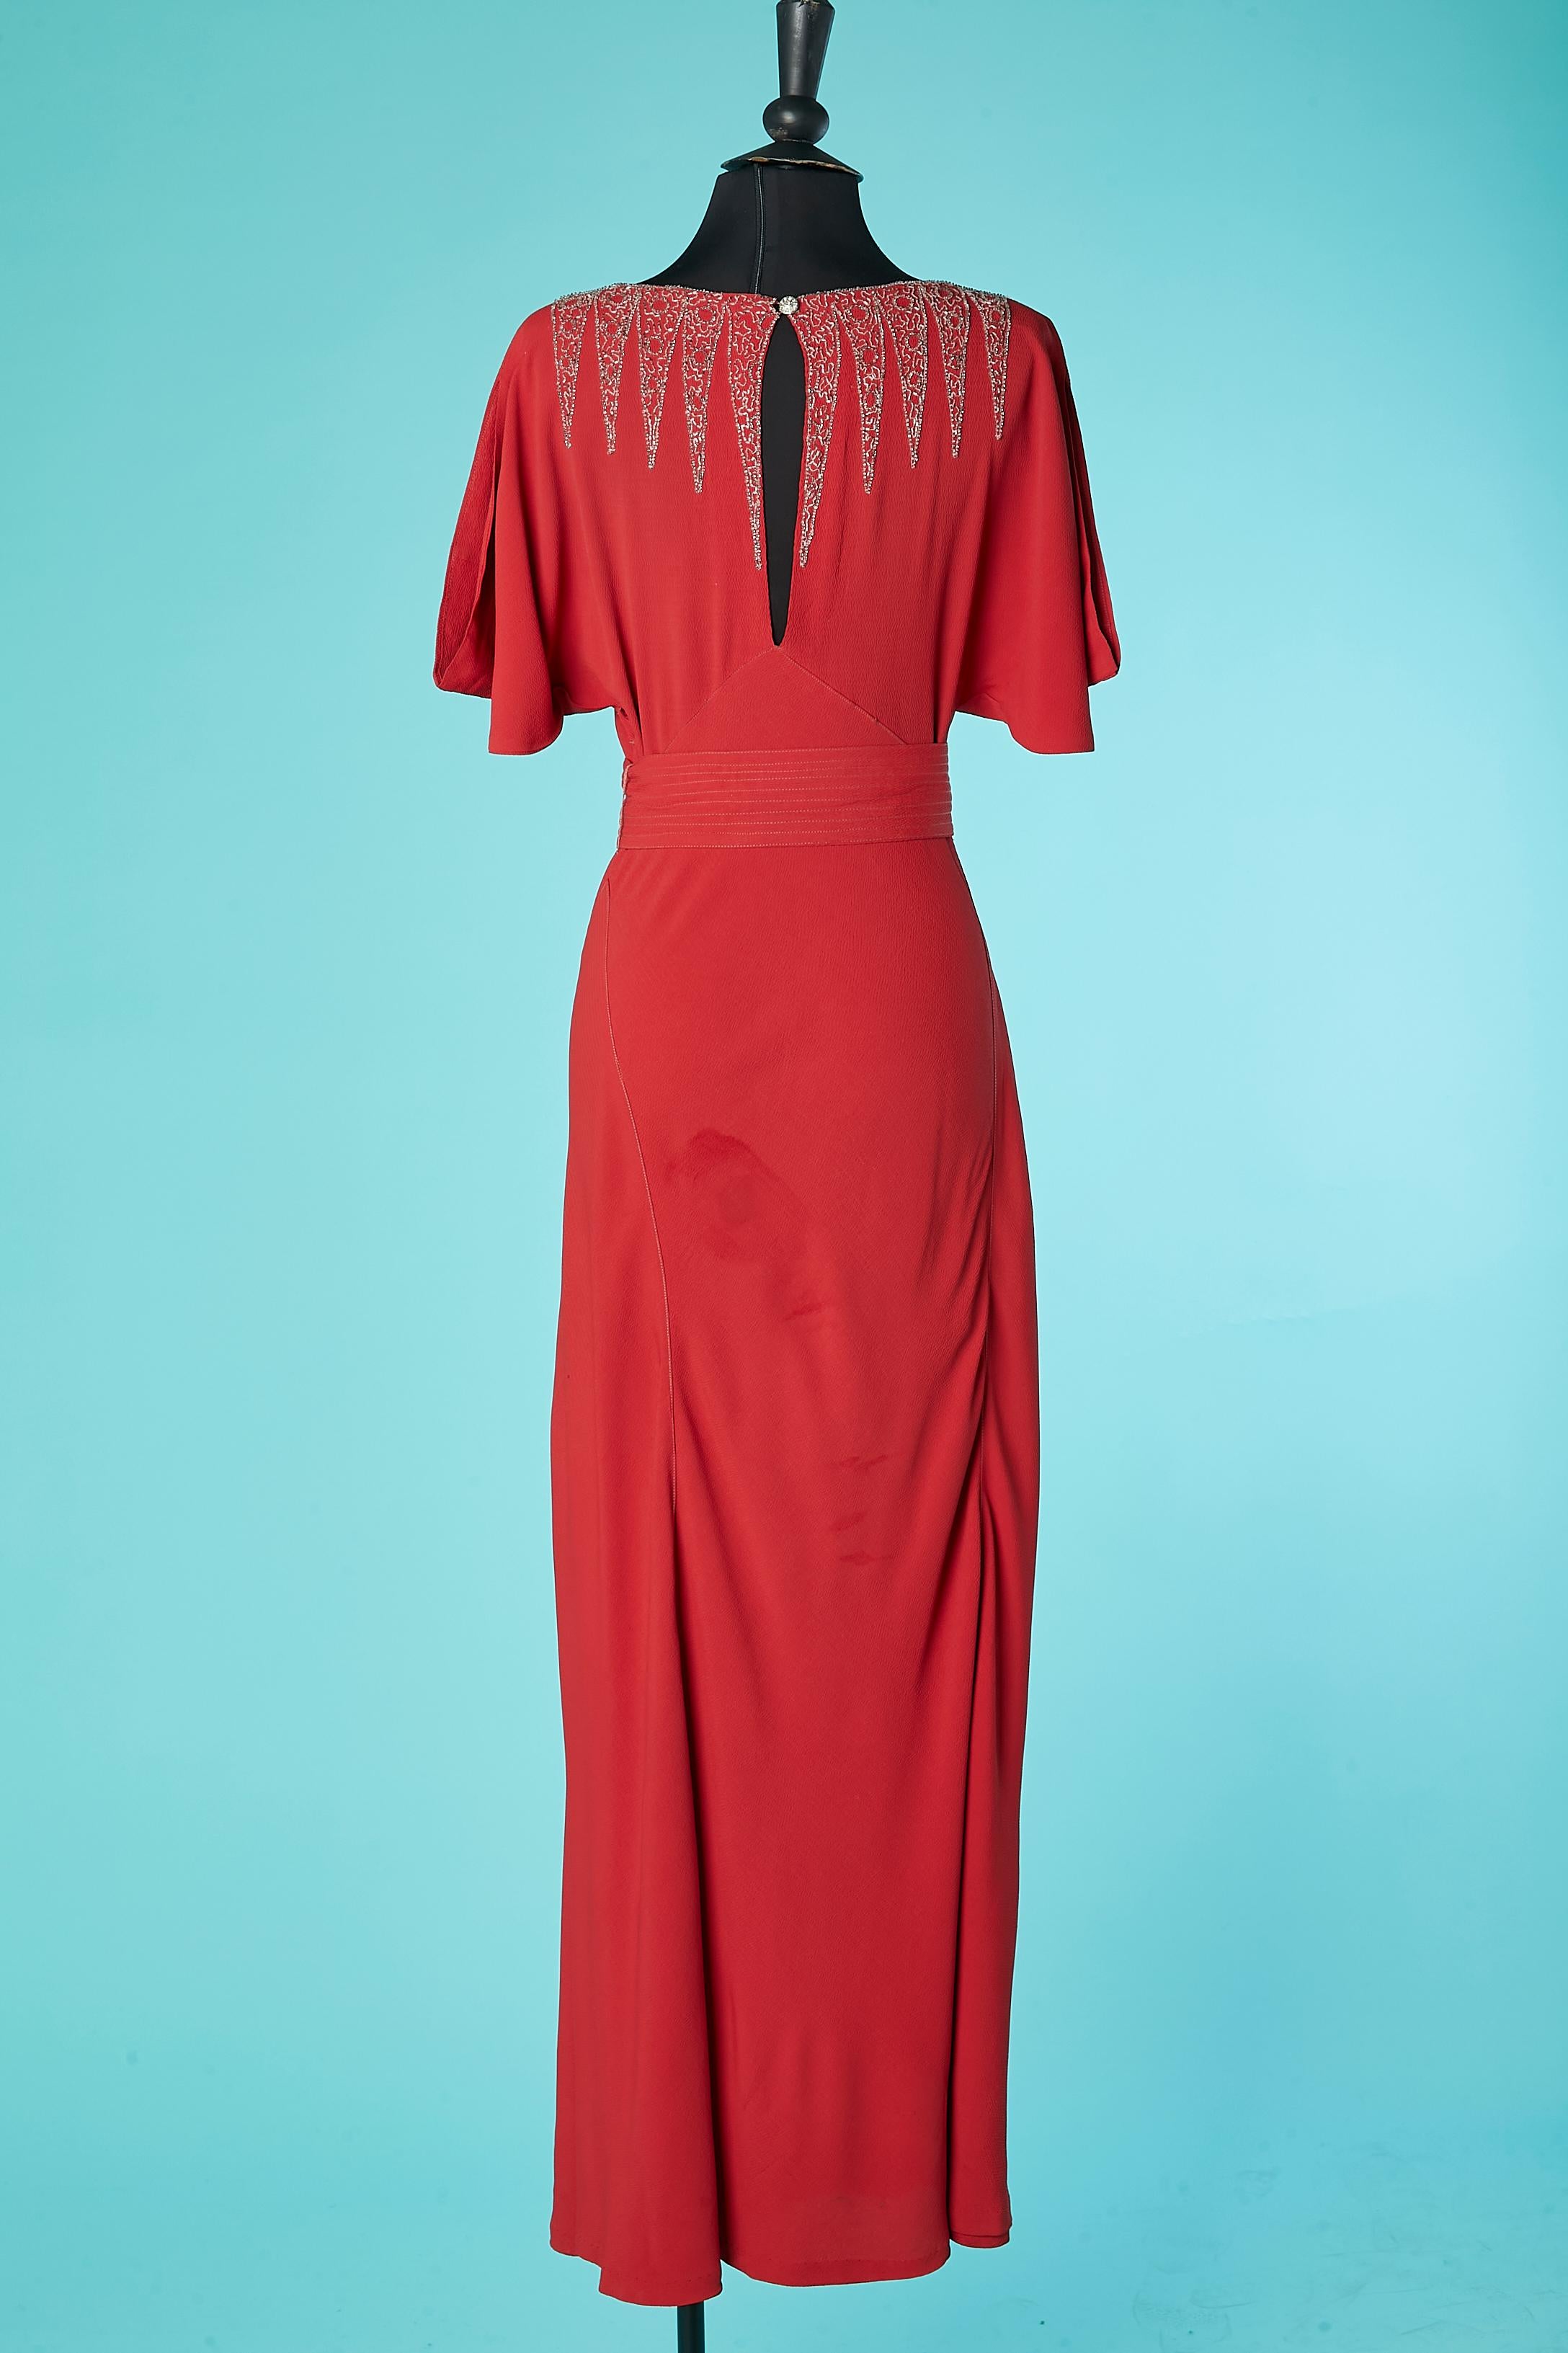 Women's Evening dress in red crêpe with beadwork neckline and bow-belt  Circa 1930's  For Sale